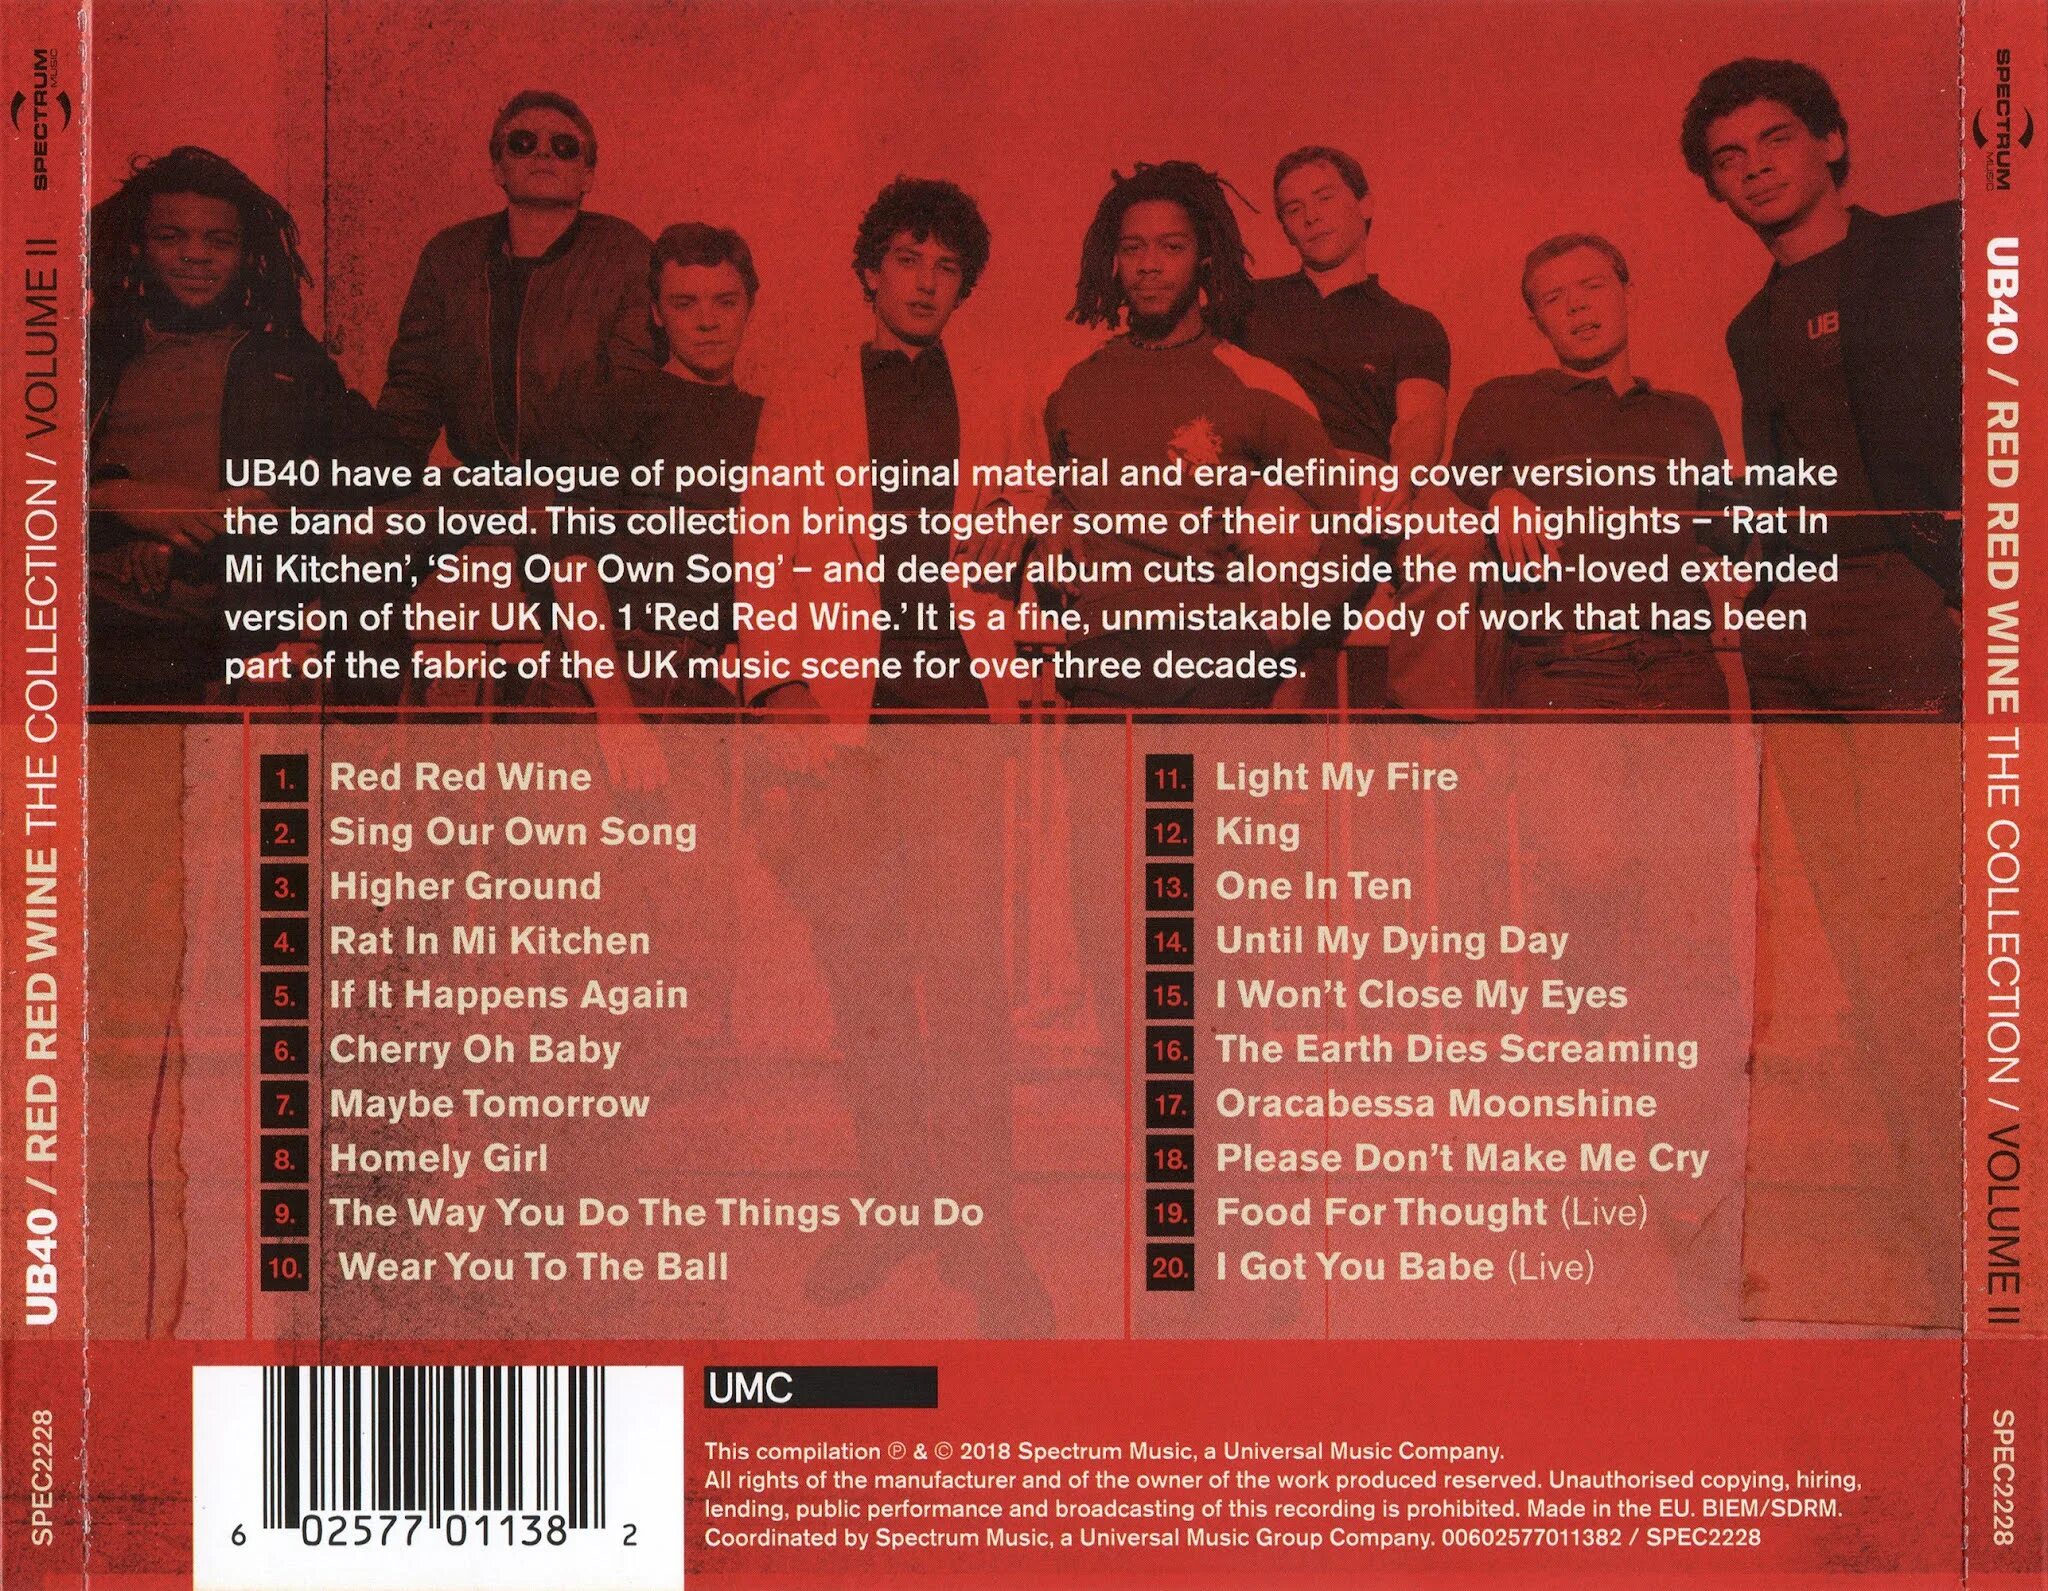 Red flac. Wine Red группа. Ub40 - Red Red Wine. The Essential Red collection. Red Wine песня.